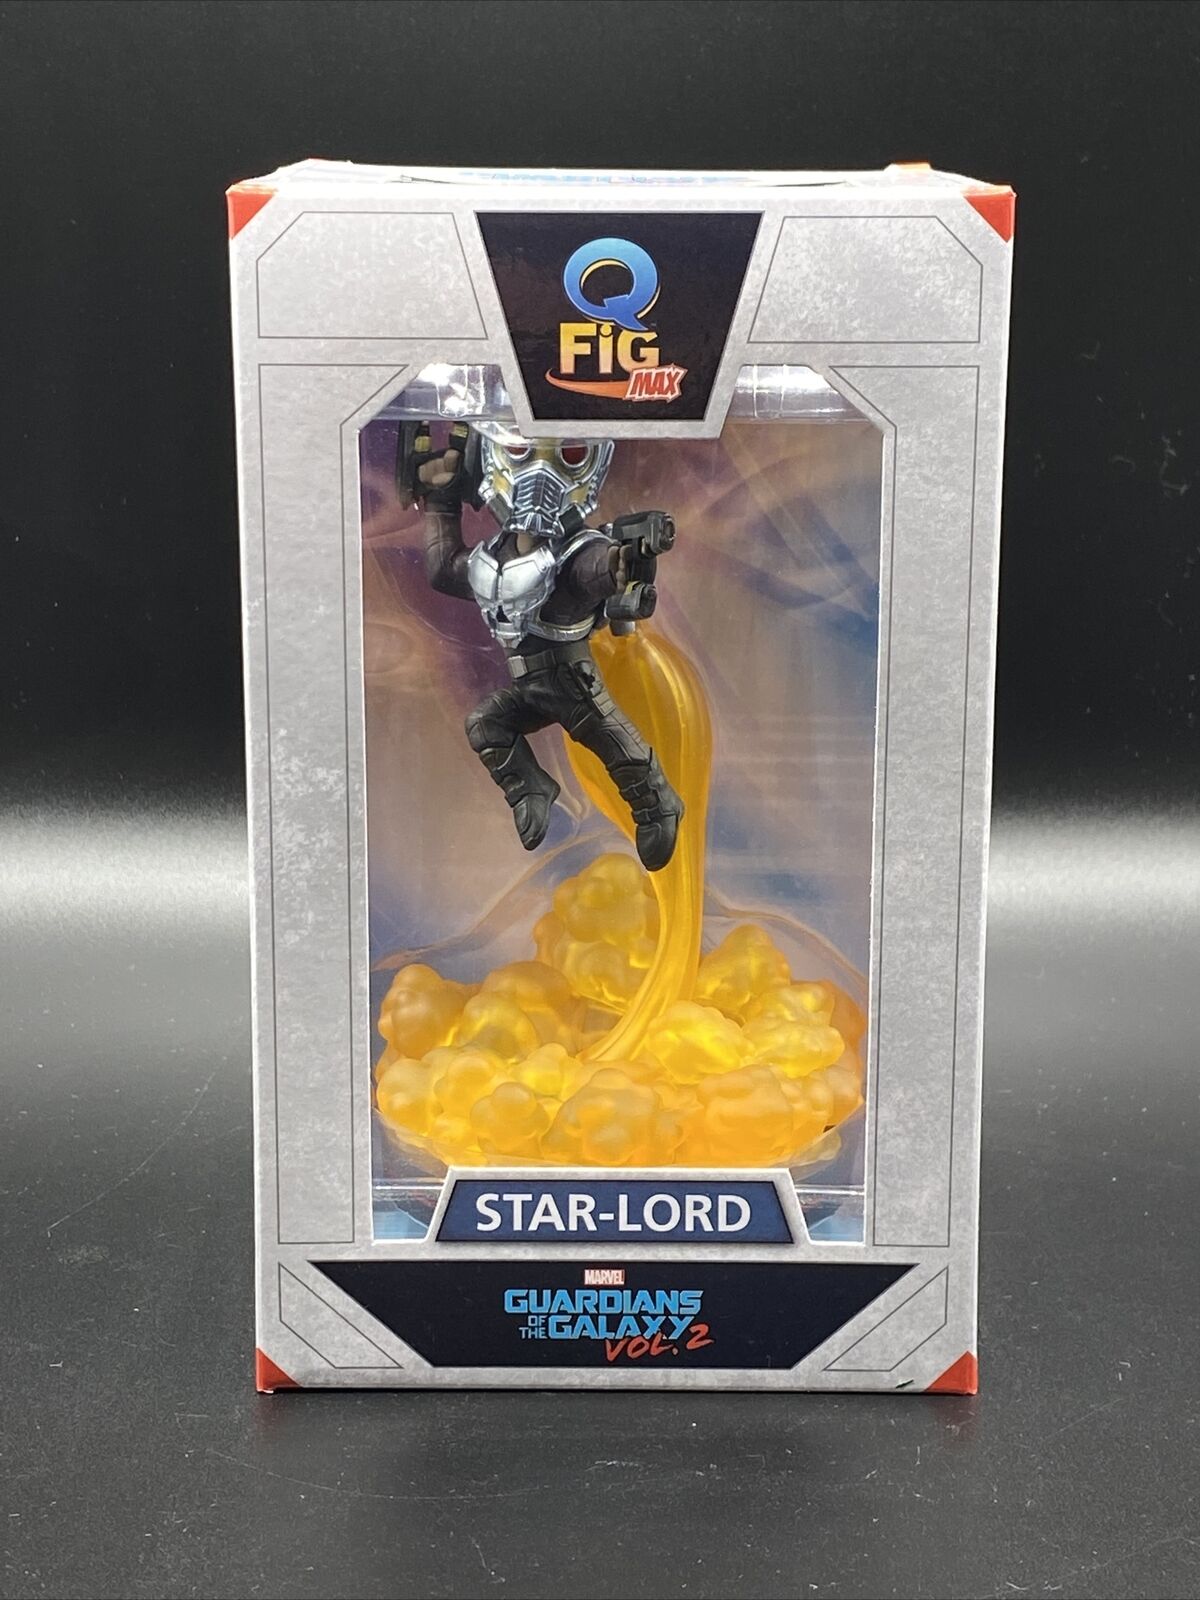 May 17 Loot Crate DX Guardians of the Galaxy  Vol 2 Star-Lord Q-Fig Max Figure